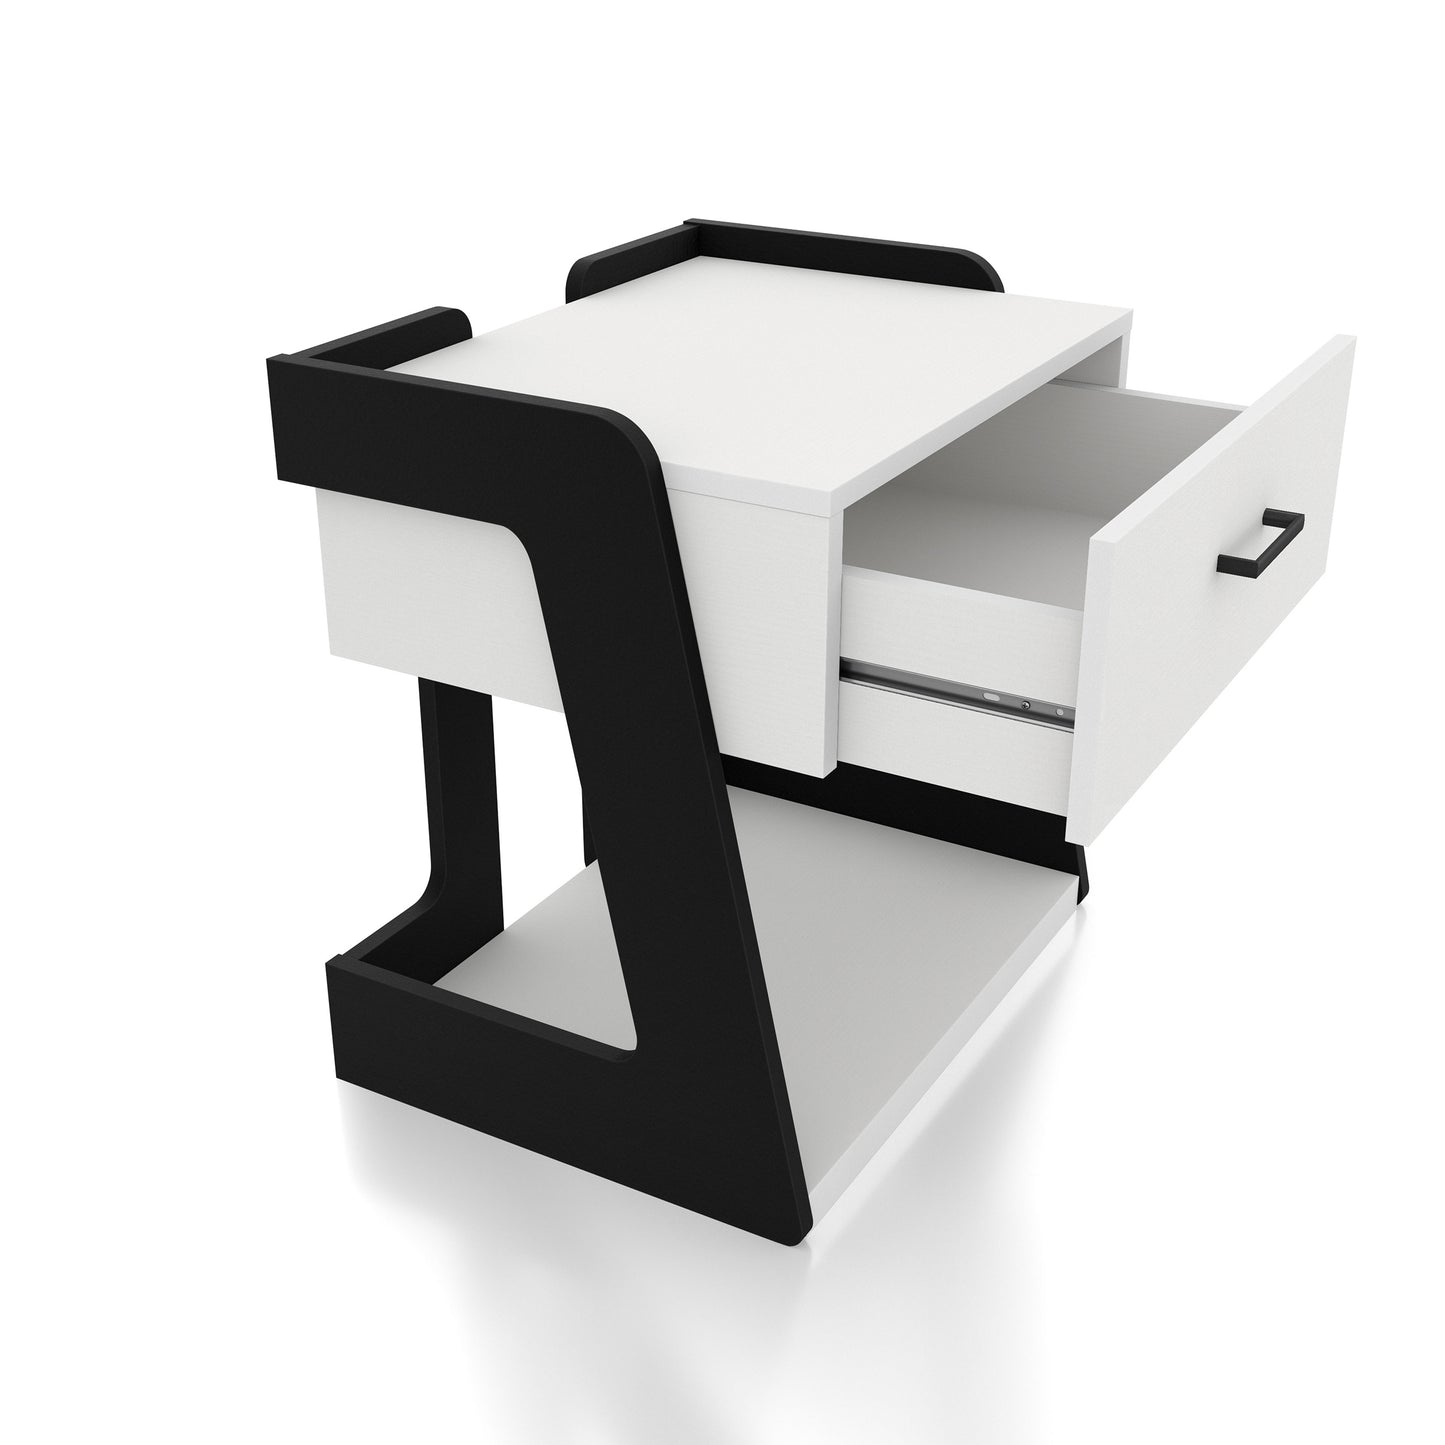 Right angled contemporary white and black one-drawer side table with a shelf and drawer open on a white background